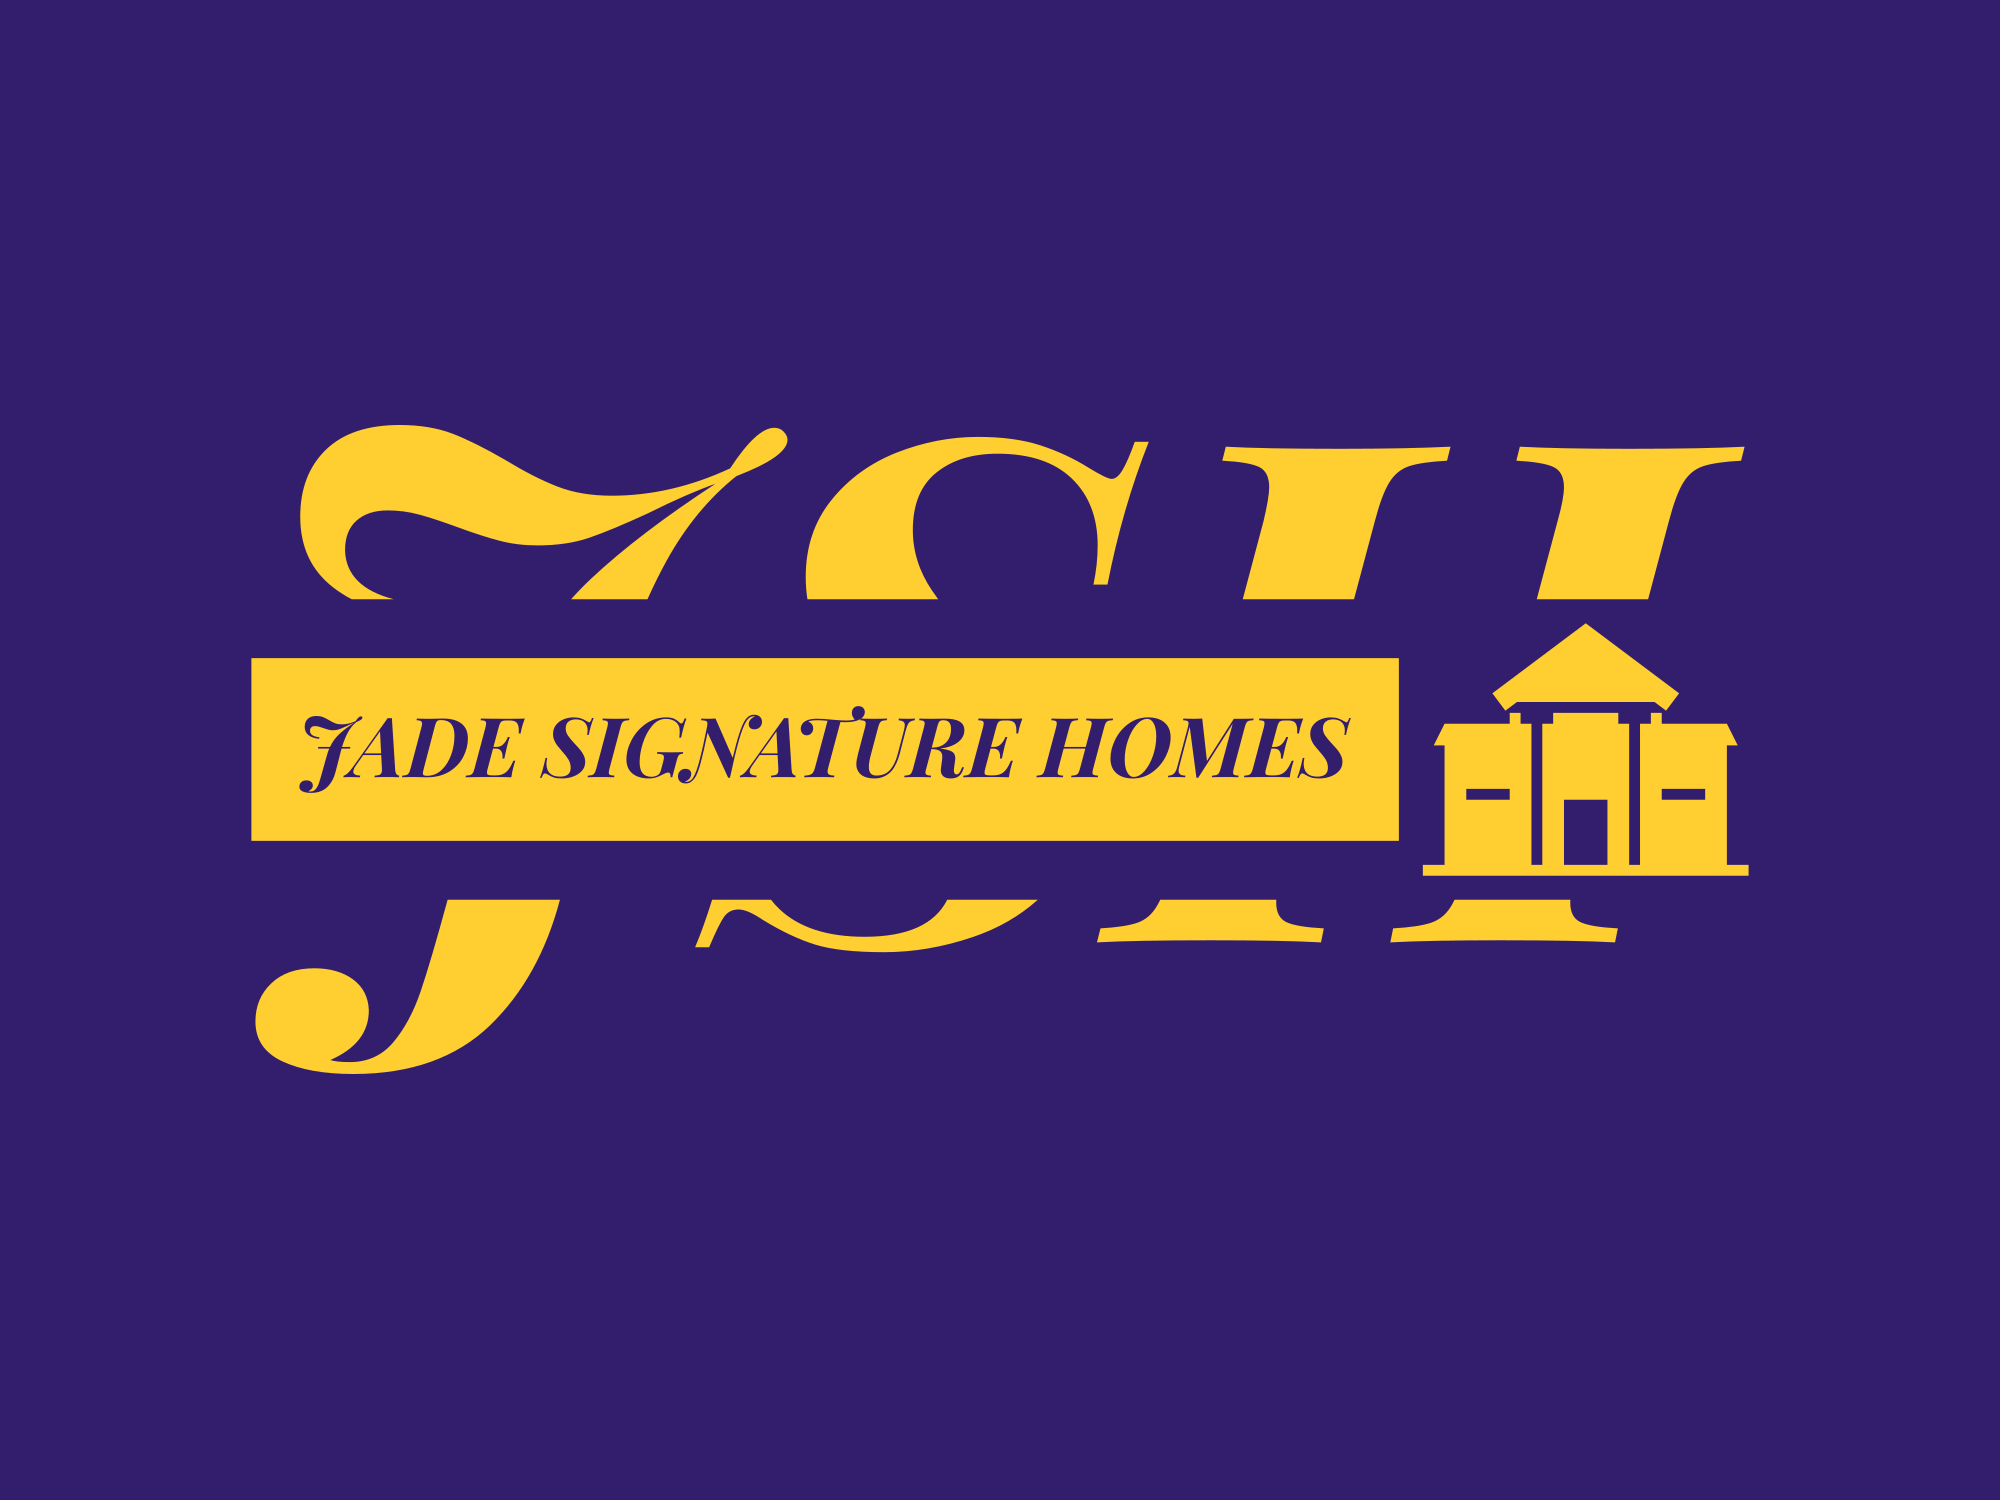 Logo of Jade Signature Homes, a luxury real estate brand.